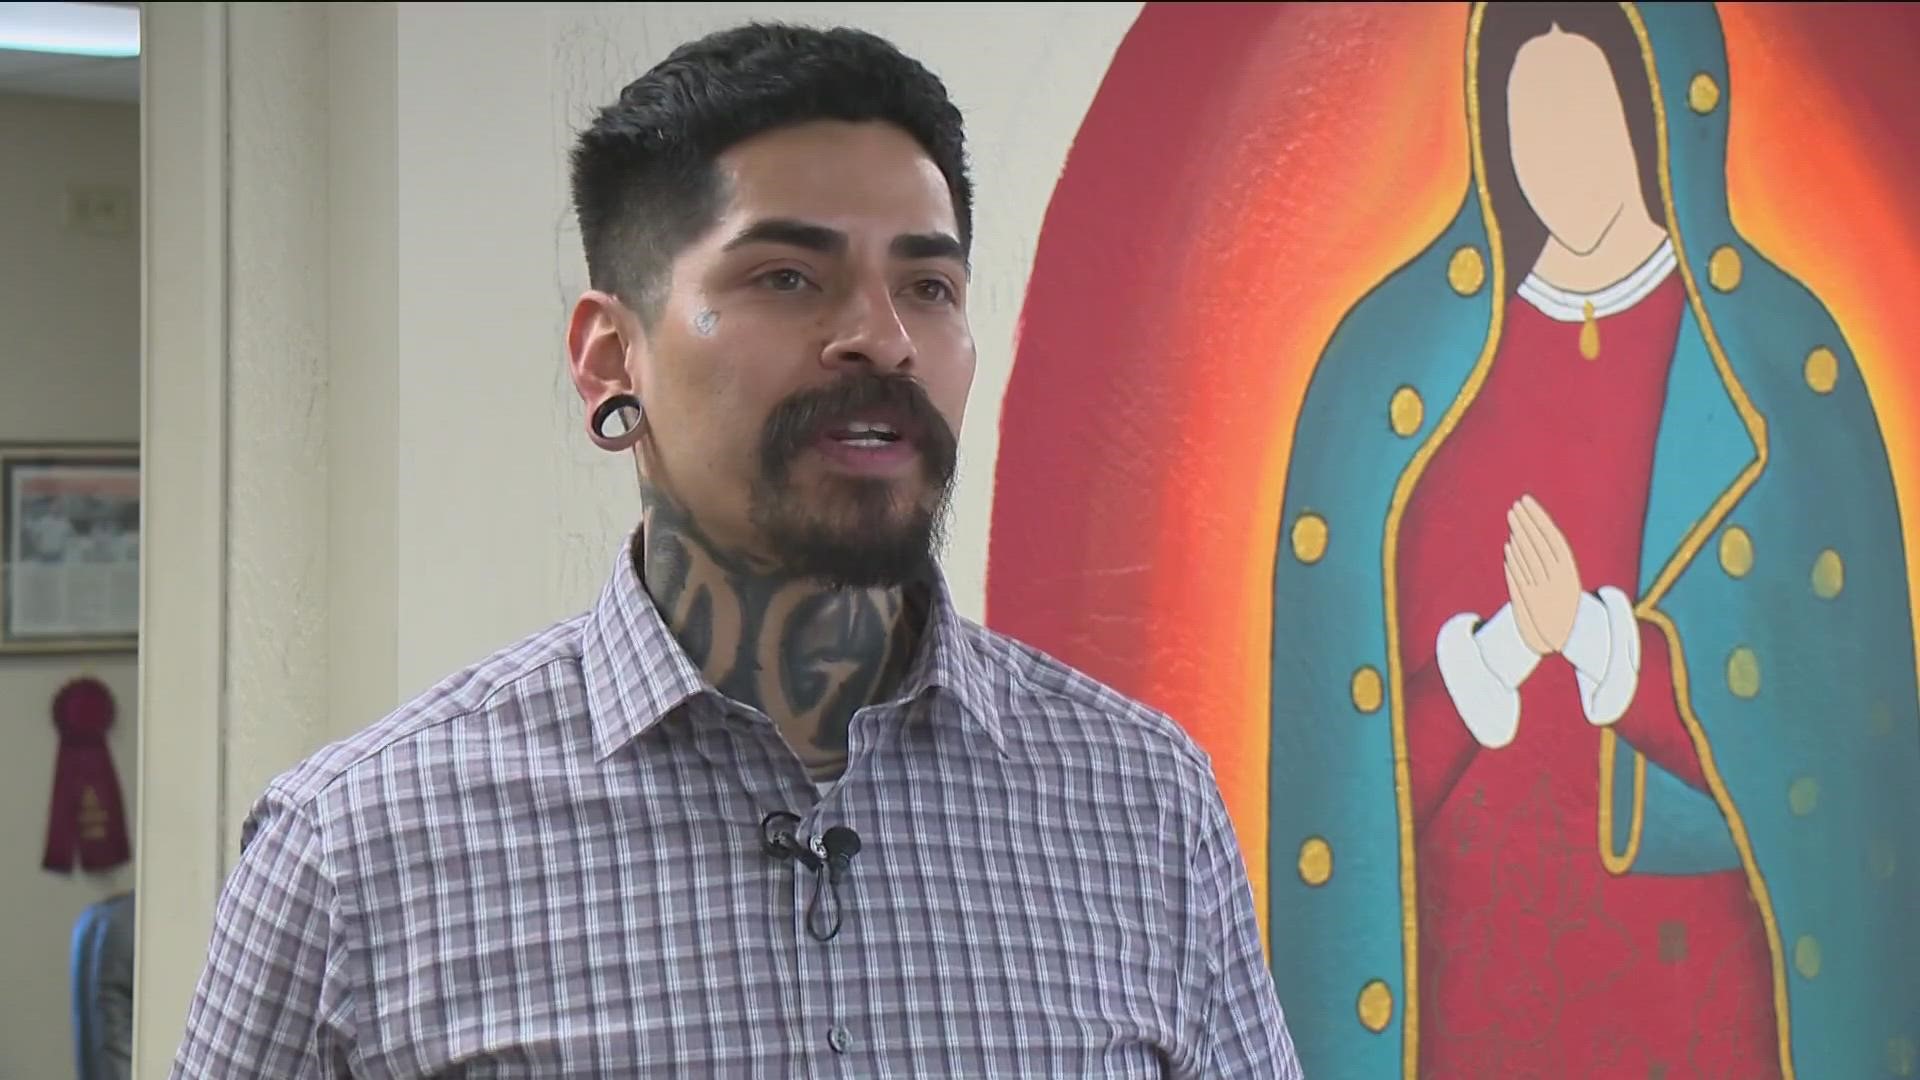 Breaking Chains Academy's Luis Granados says the doors are always open for any teenager who needs a safe place to land. The goal? To put them on a path to success.